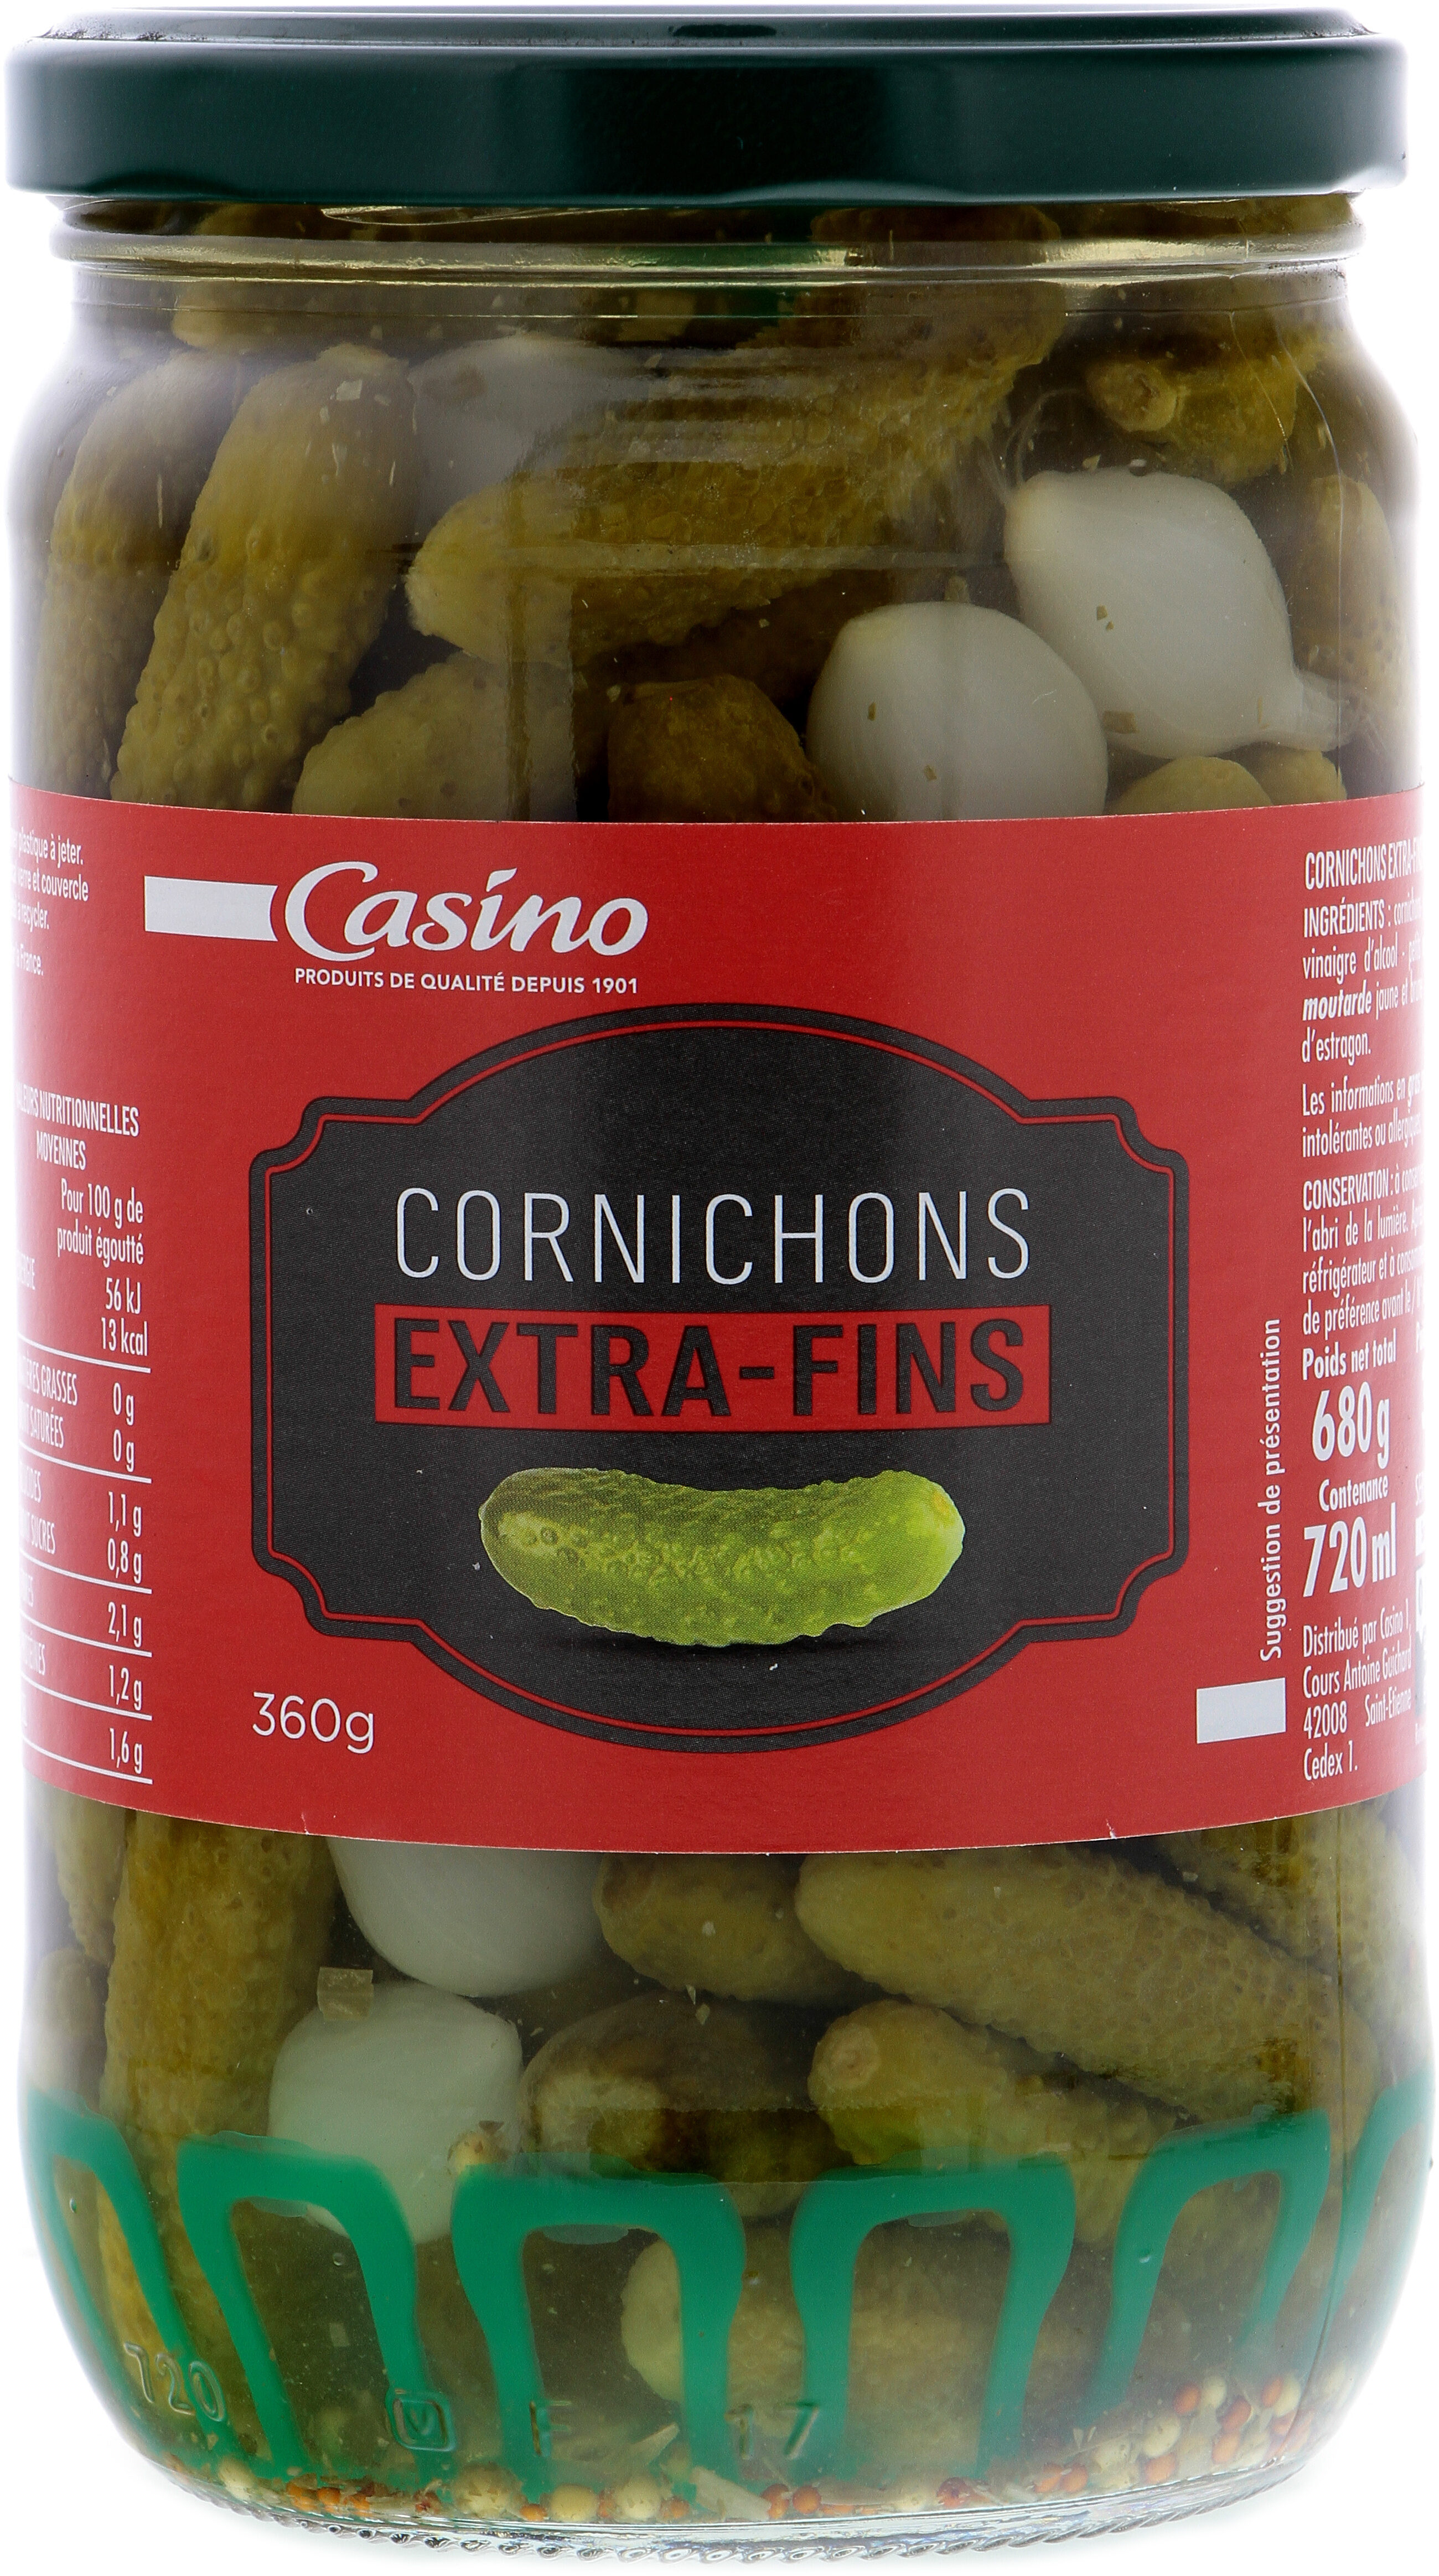 Cornichons extrafins - Product - fr